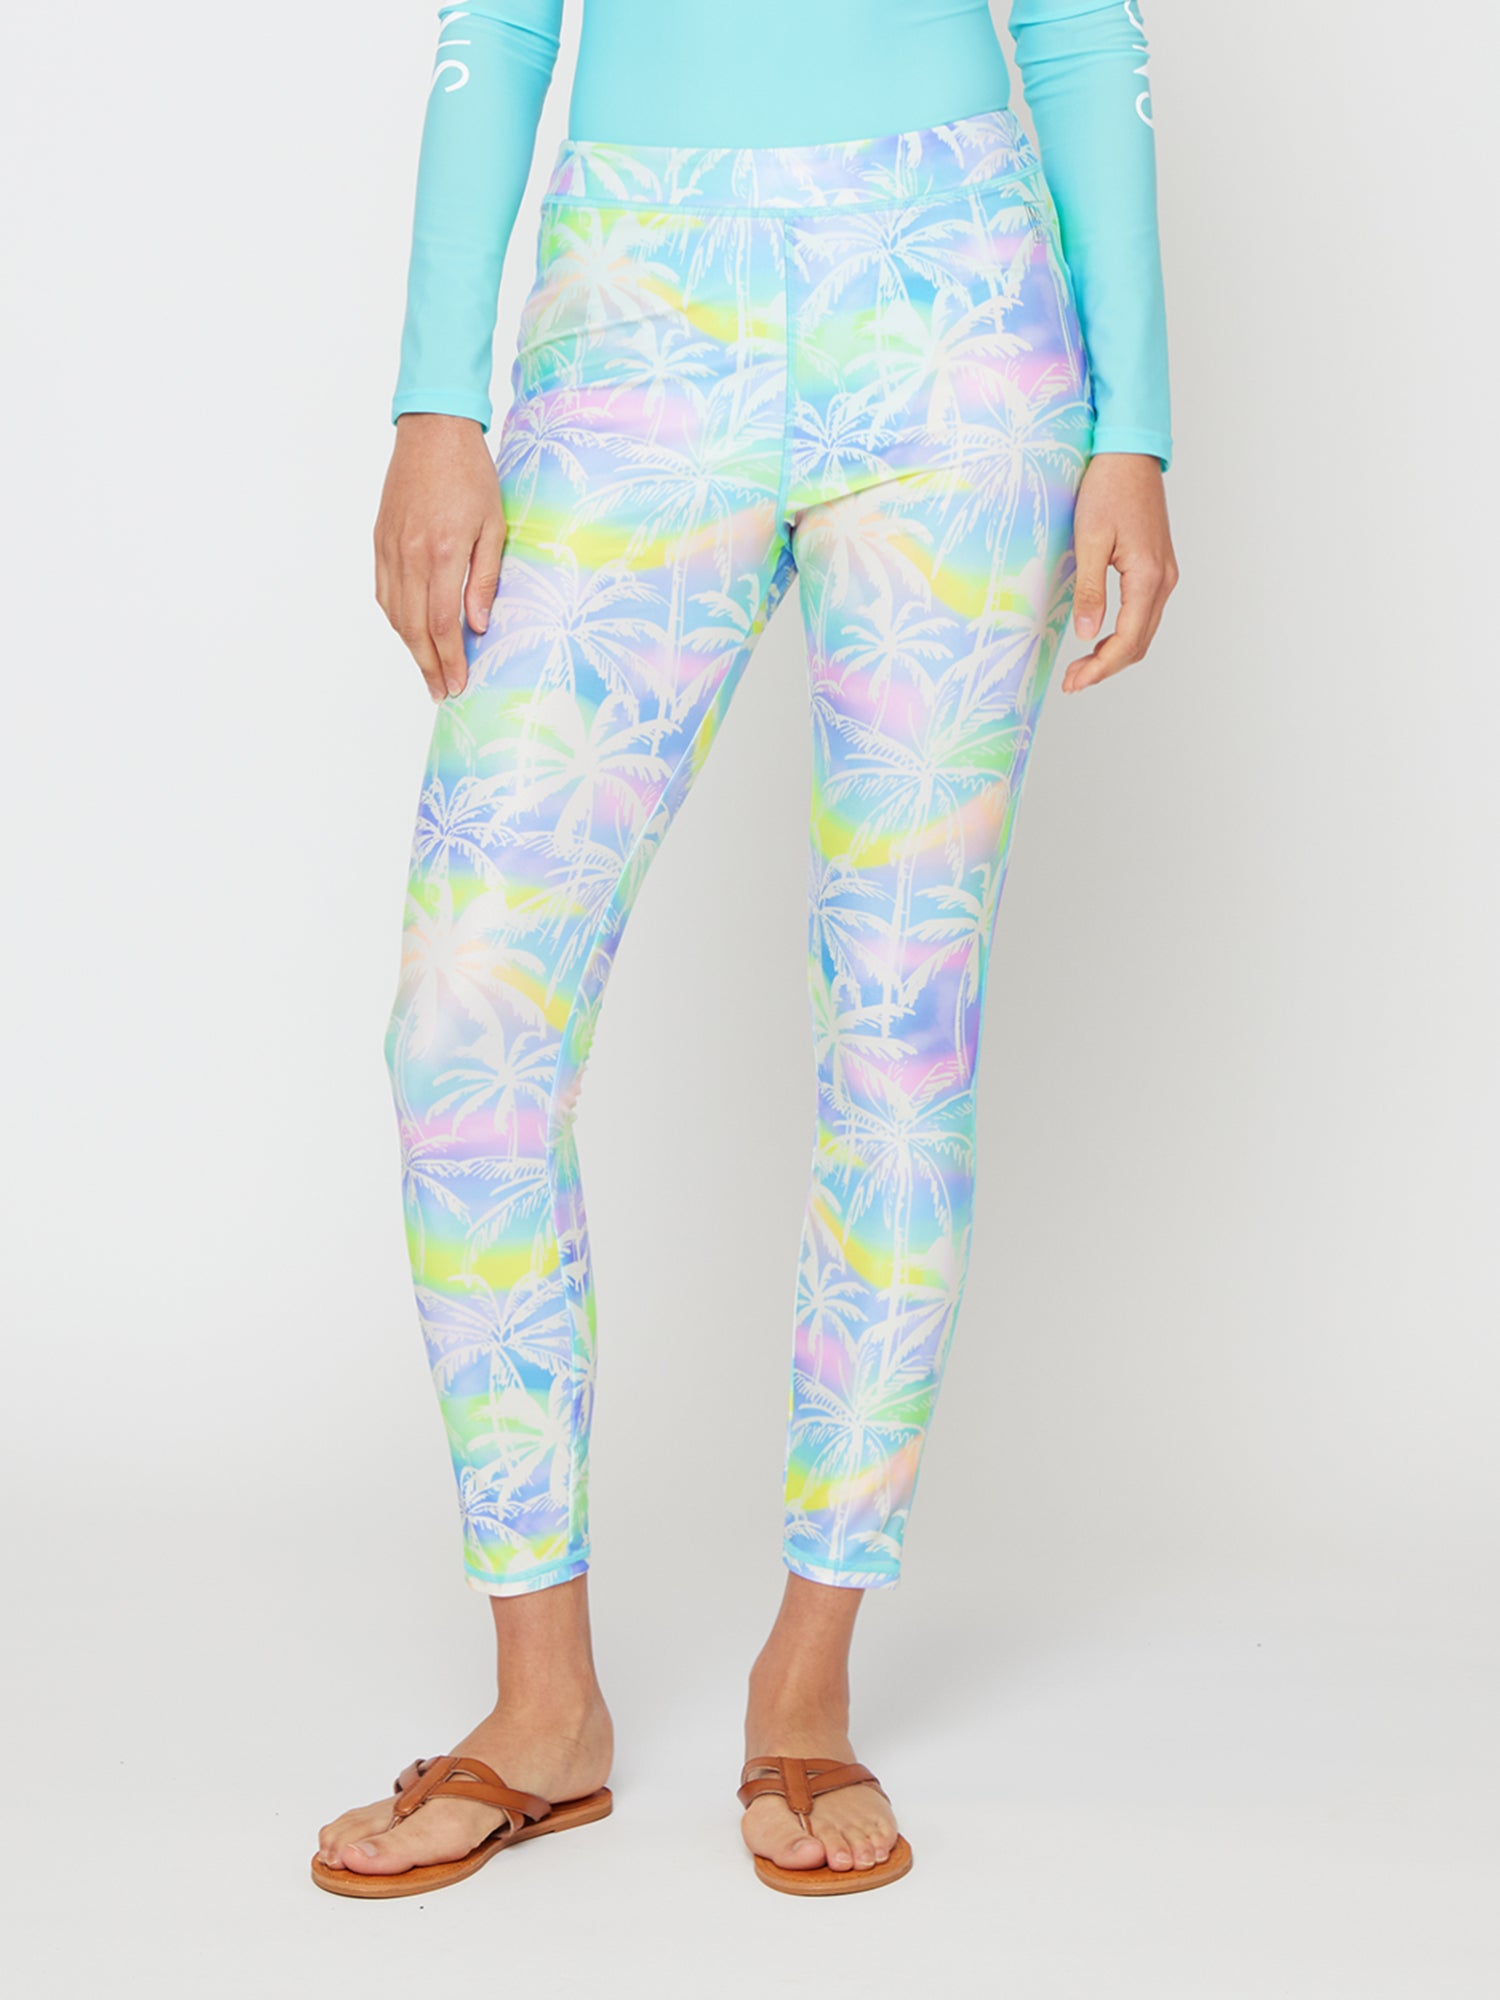 Surf Leggings - The Newest Must-Have in Your Tropical Surf